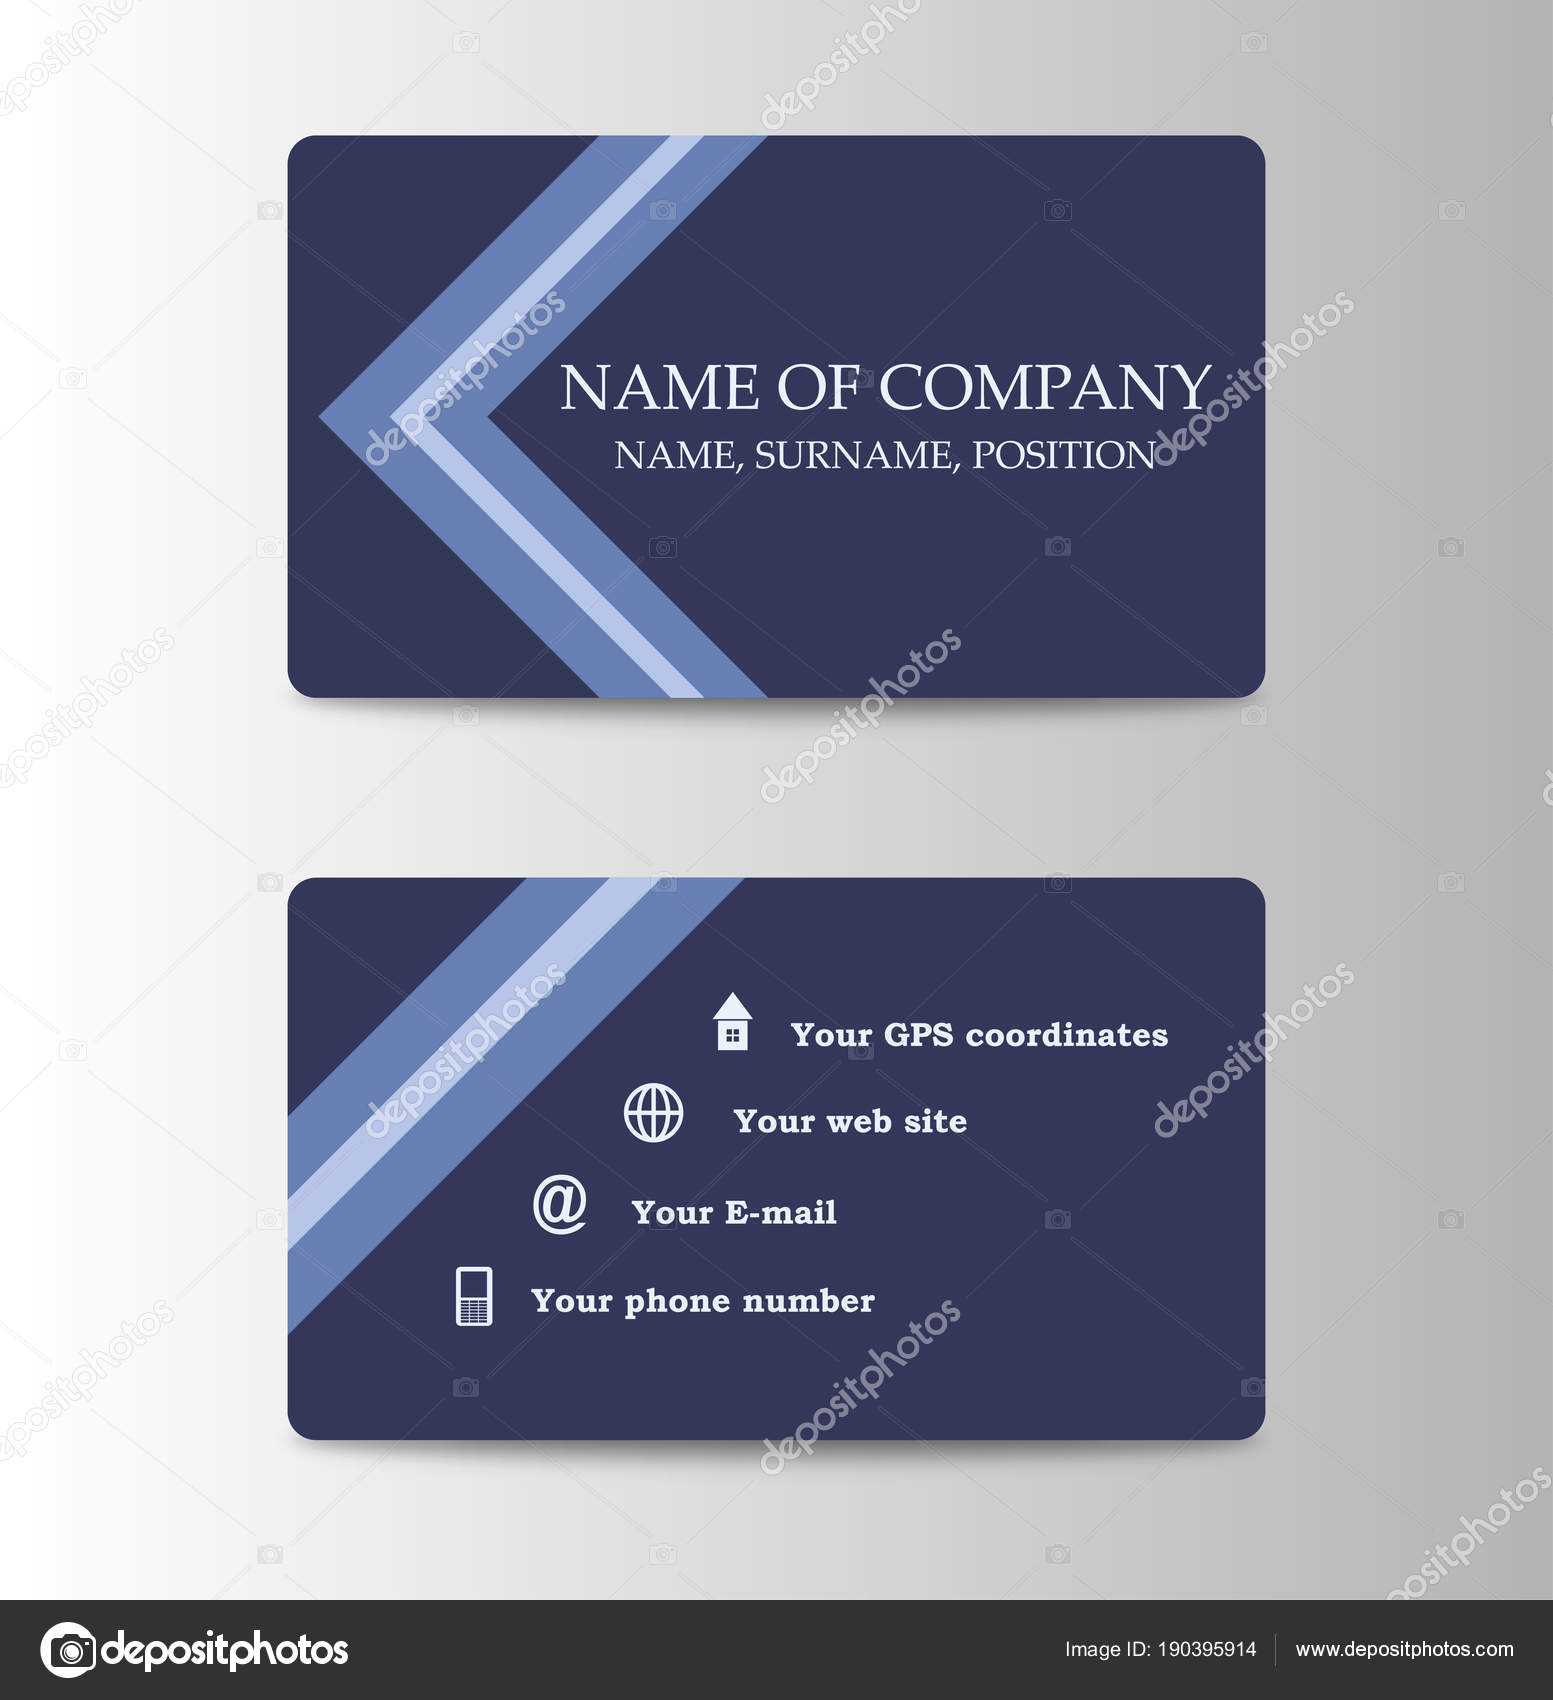 Corporate Id Card Design Template. Personal Id Card For Within Personal Identification Card Template